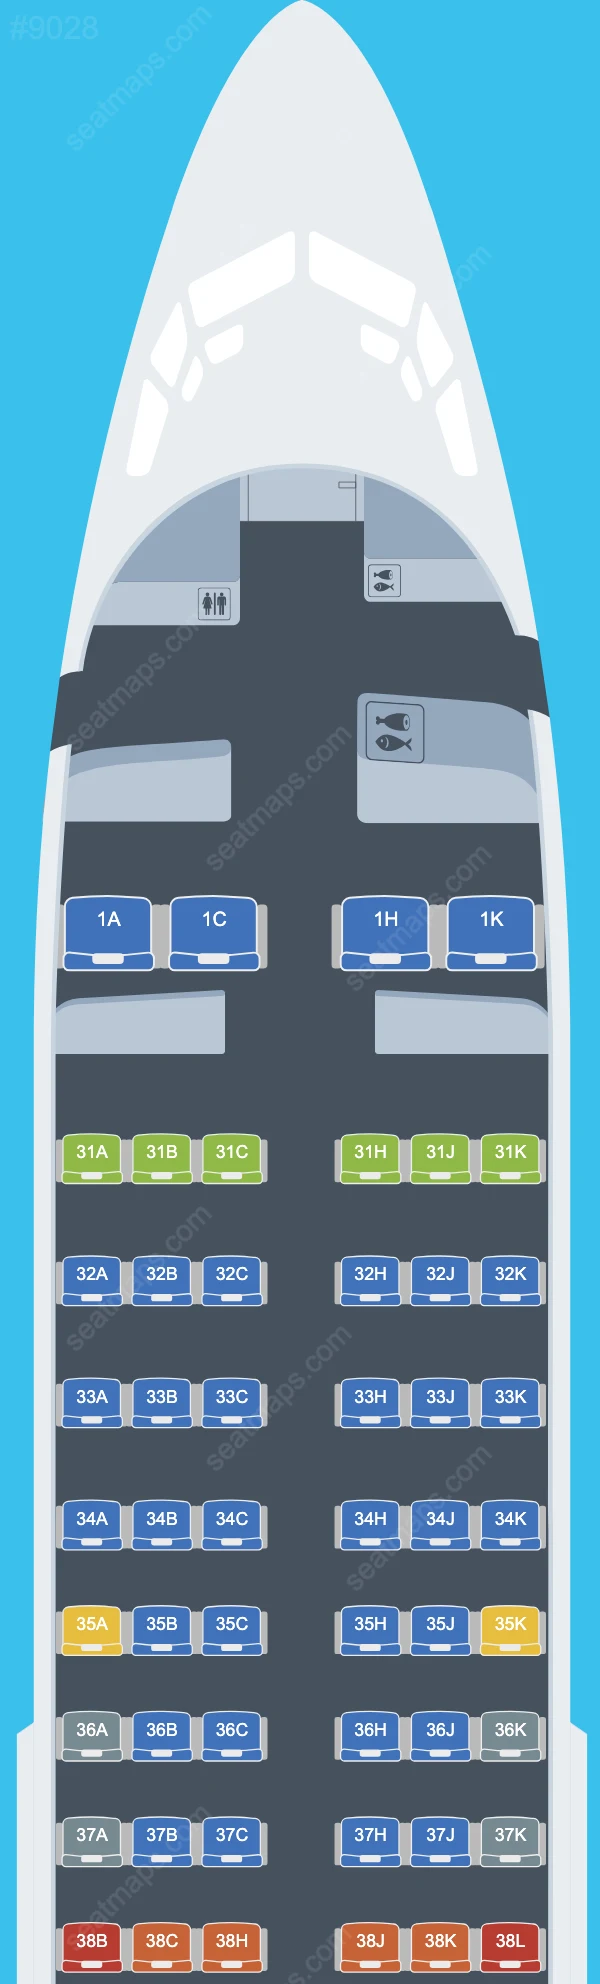 China Southern Boeing 737 Seat Maps 737-700 V.4